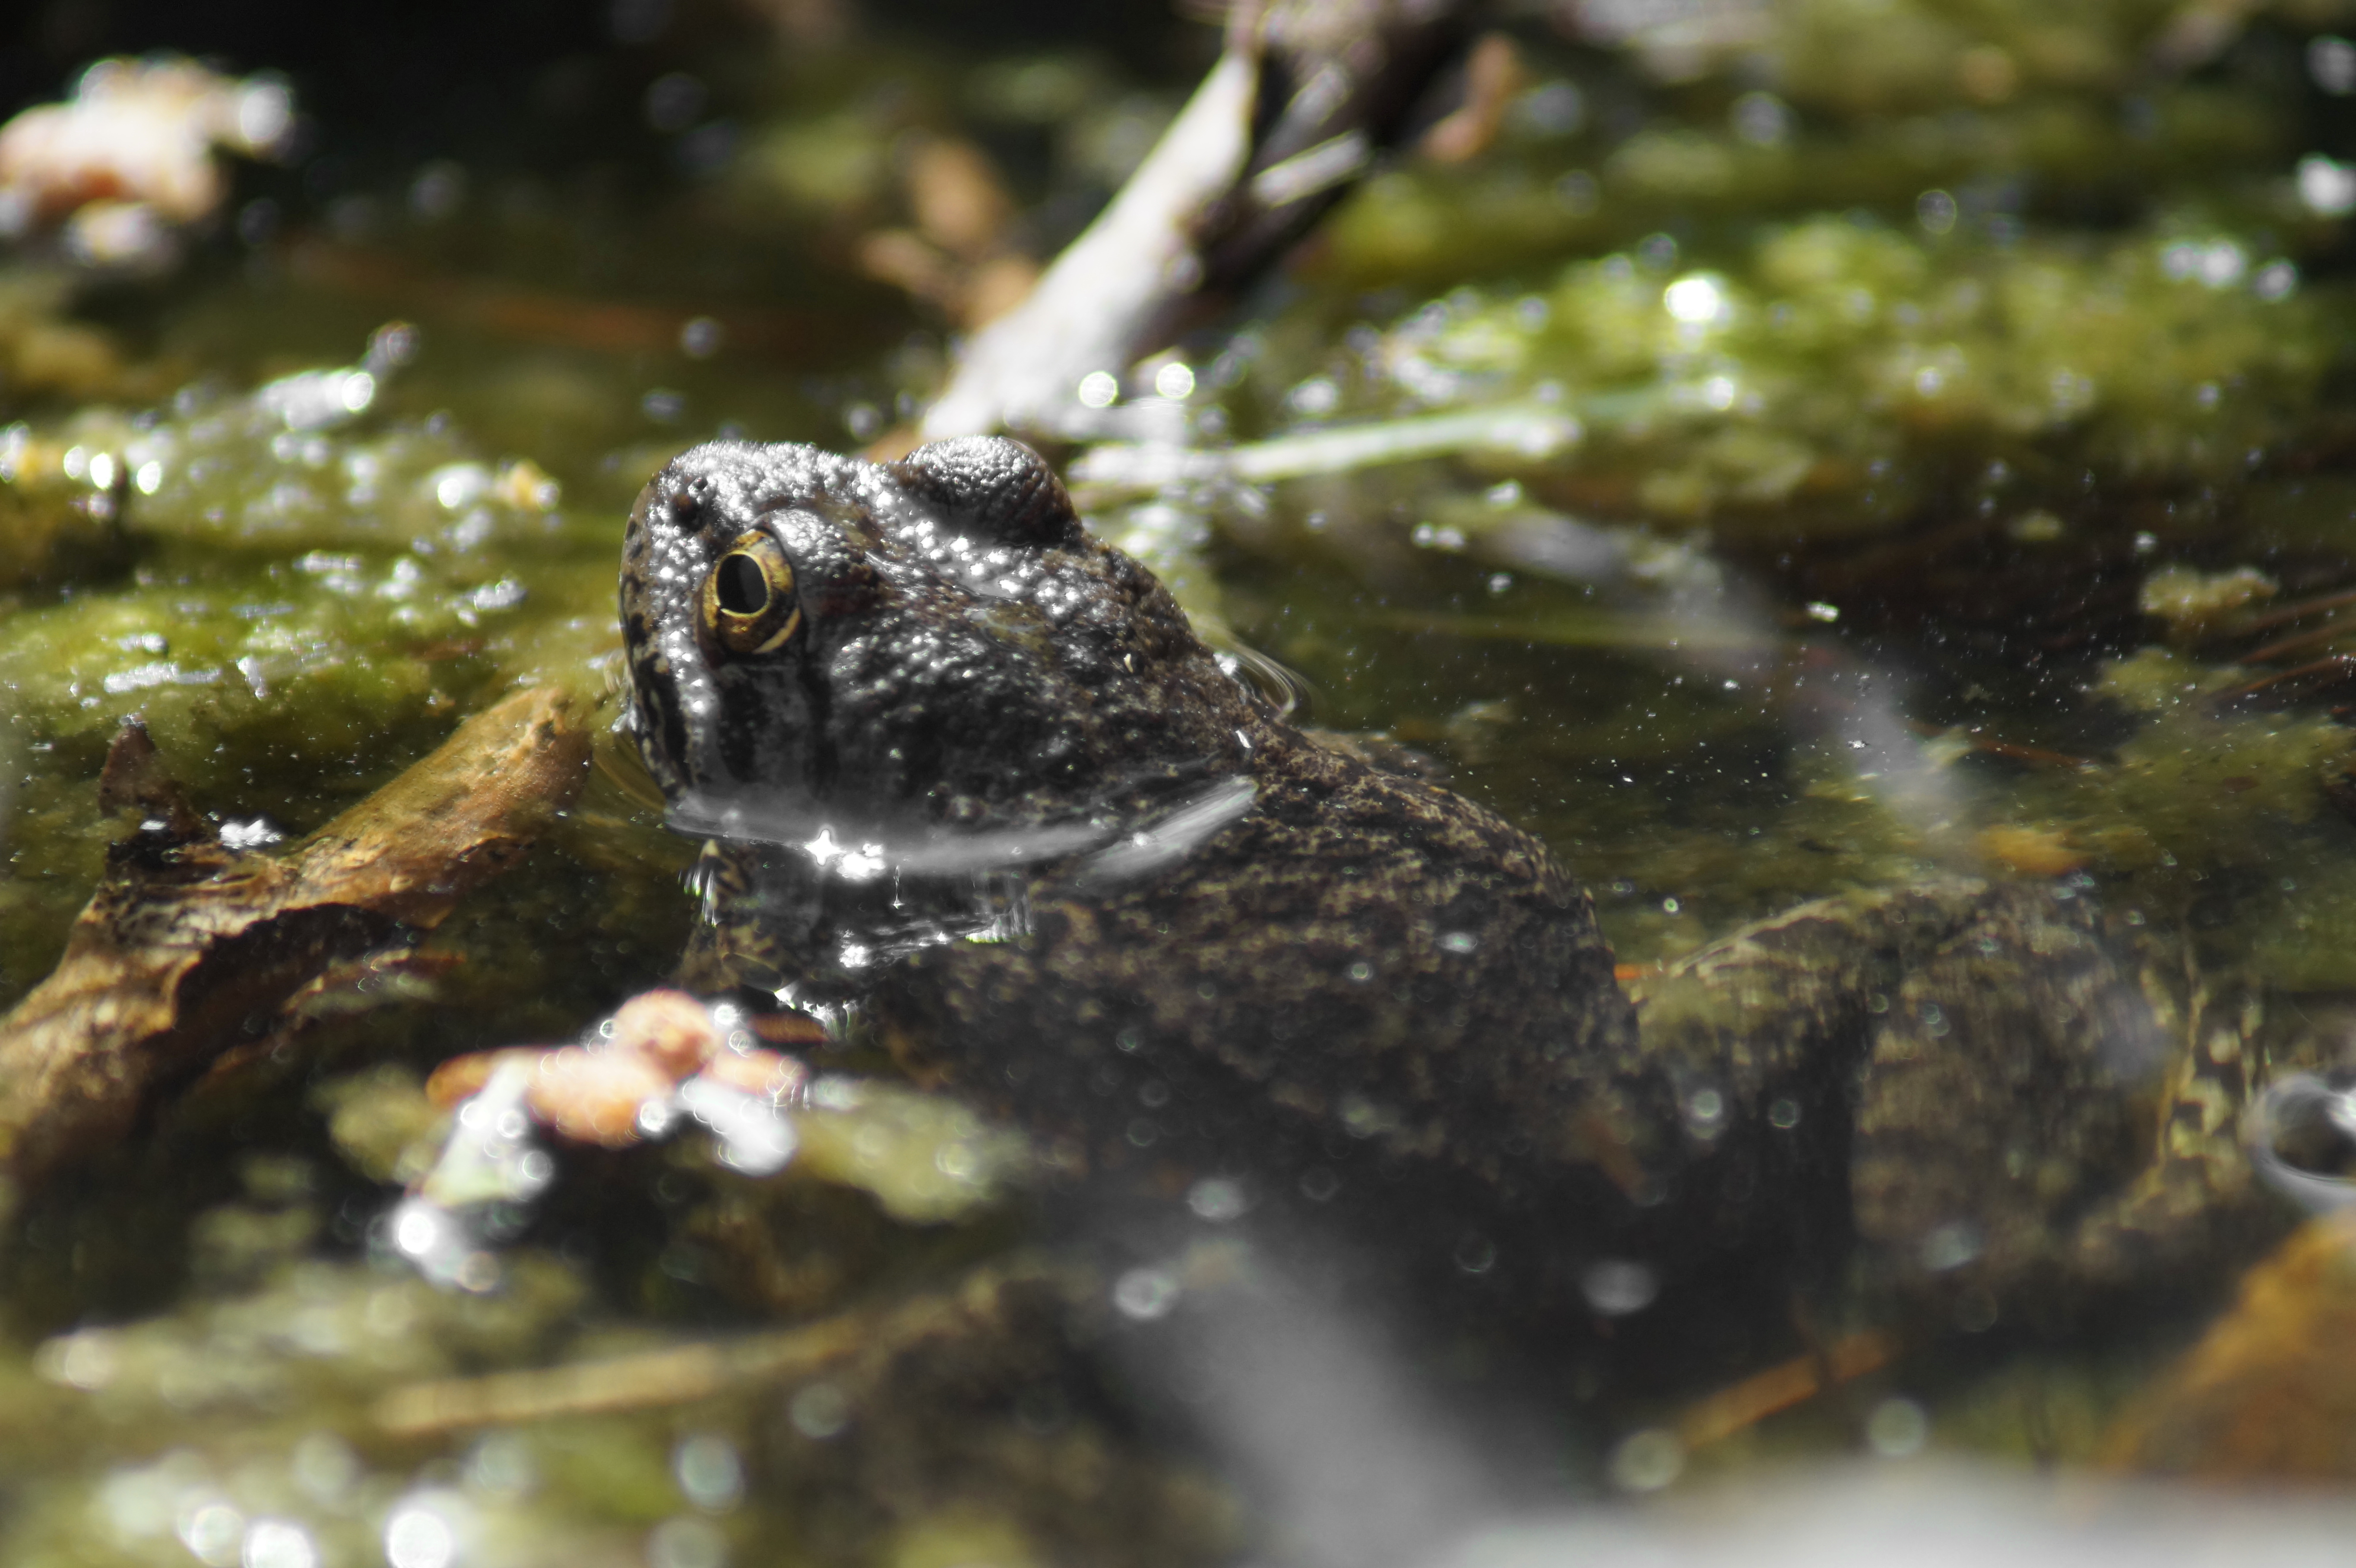 Sierra Nevada yellow-legged frog in pond with its head above the water line